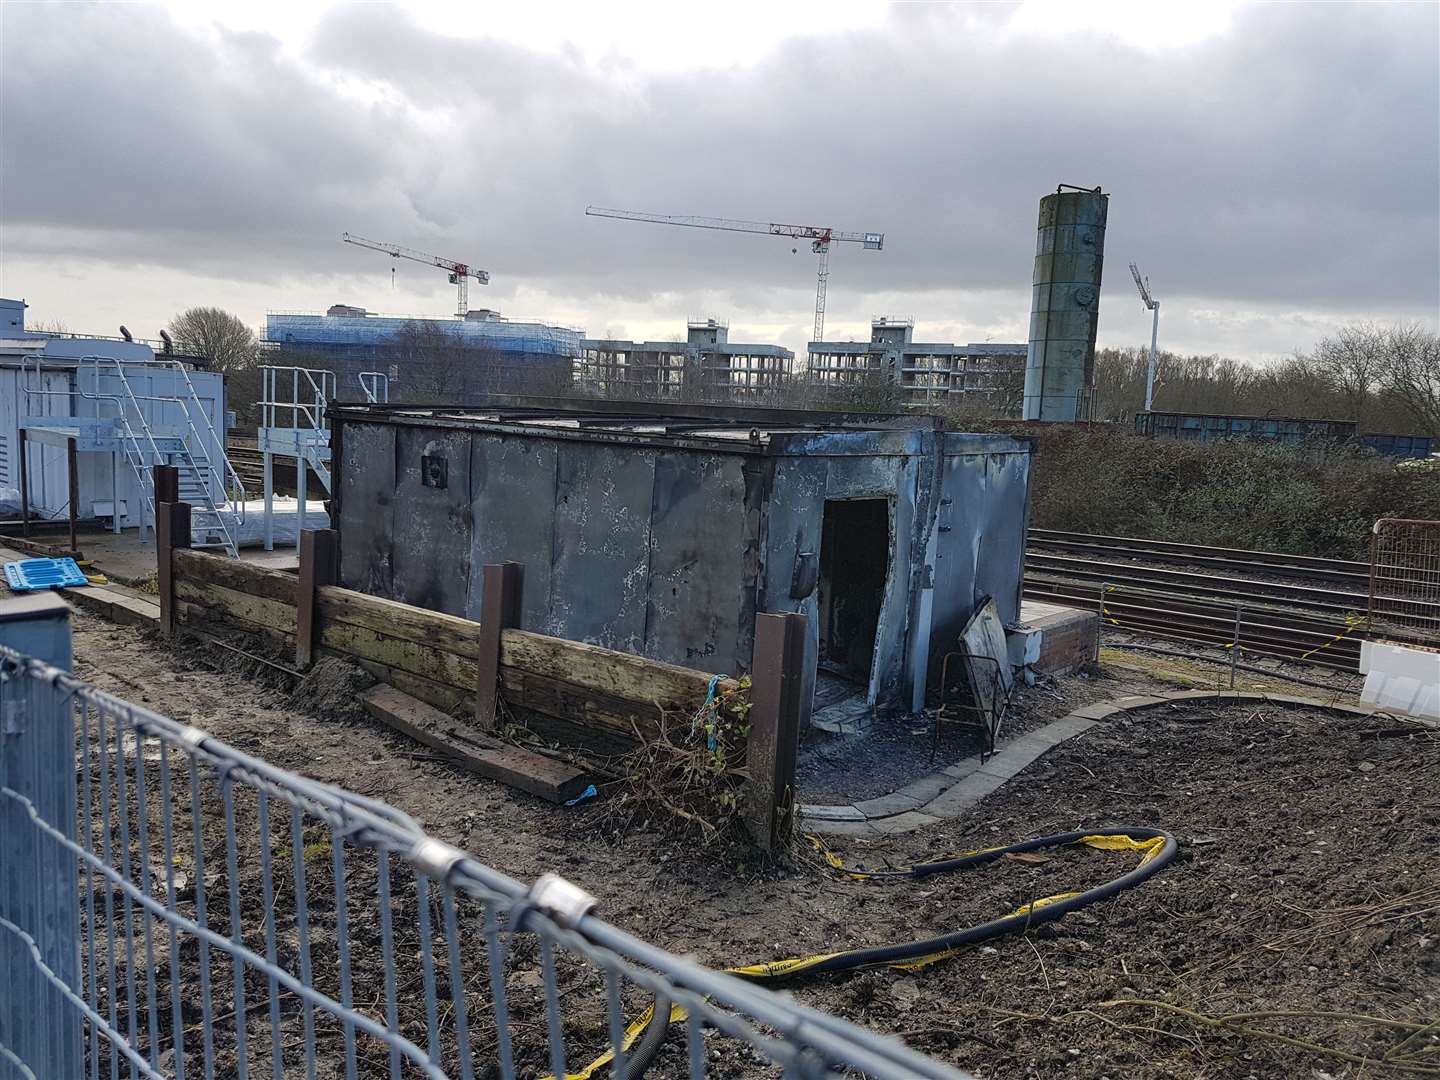 The Ashford substation where an employee suffered serious burns on December 20, 2018